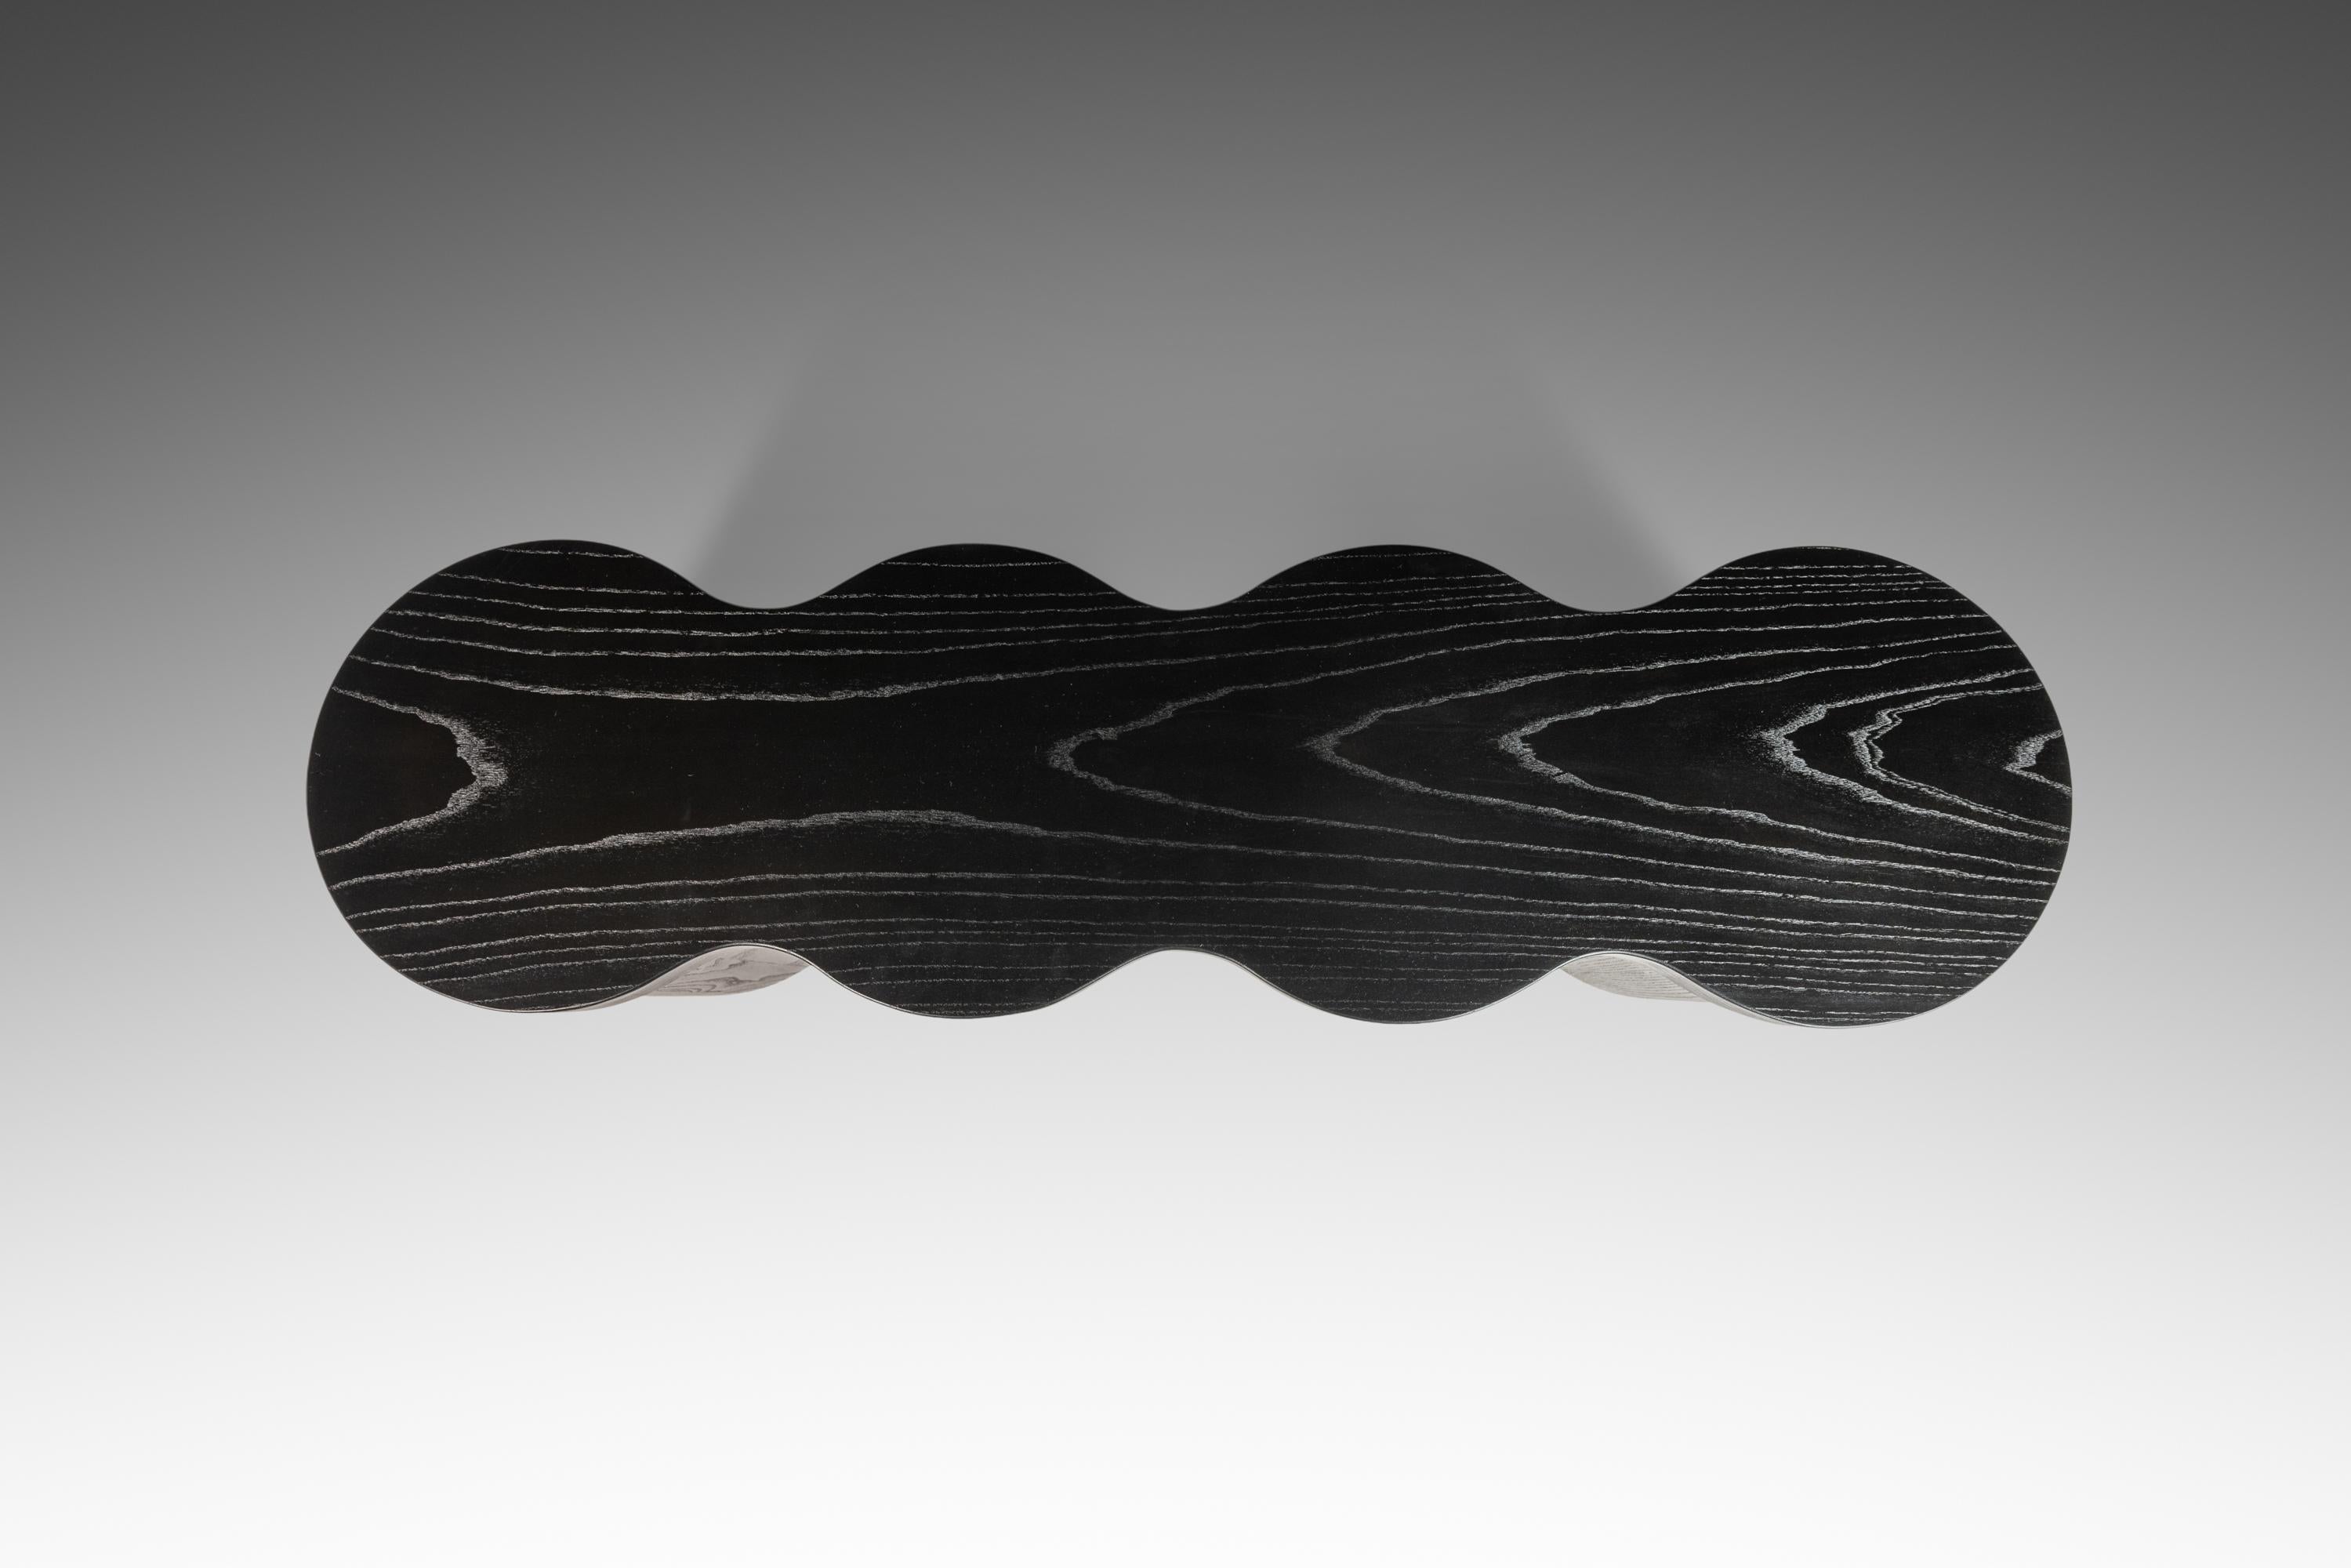 American Hand-Turned Sculptural Bench in Solid Ebonized Ash by Mark Leblanc, c. 2000s For Sale